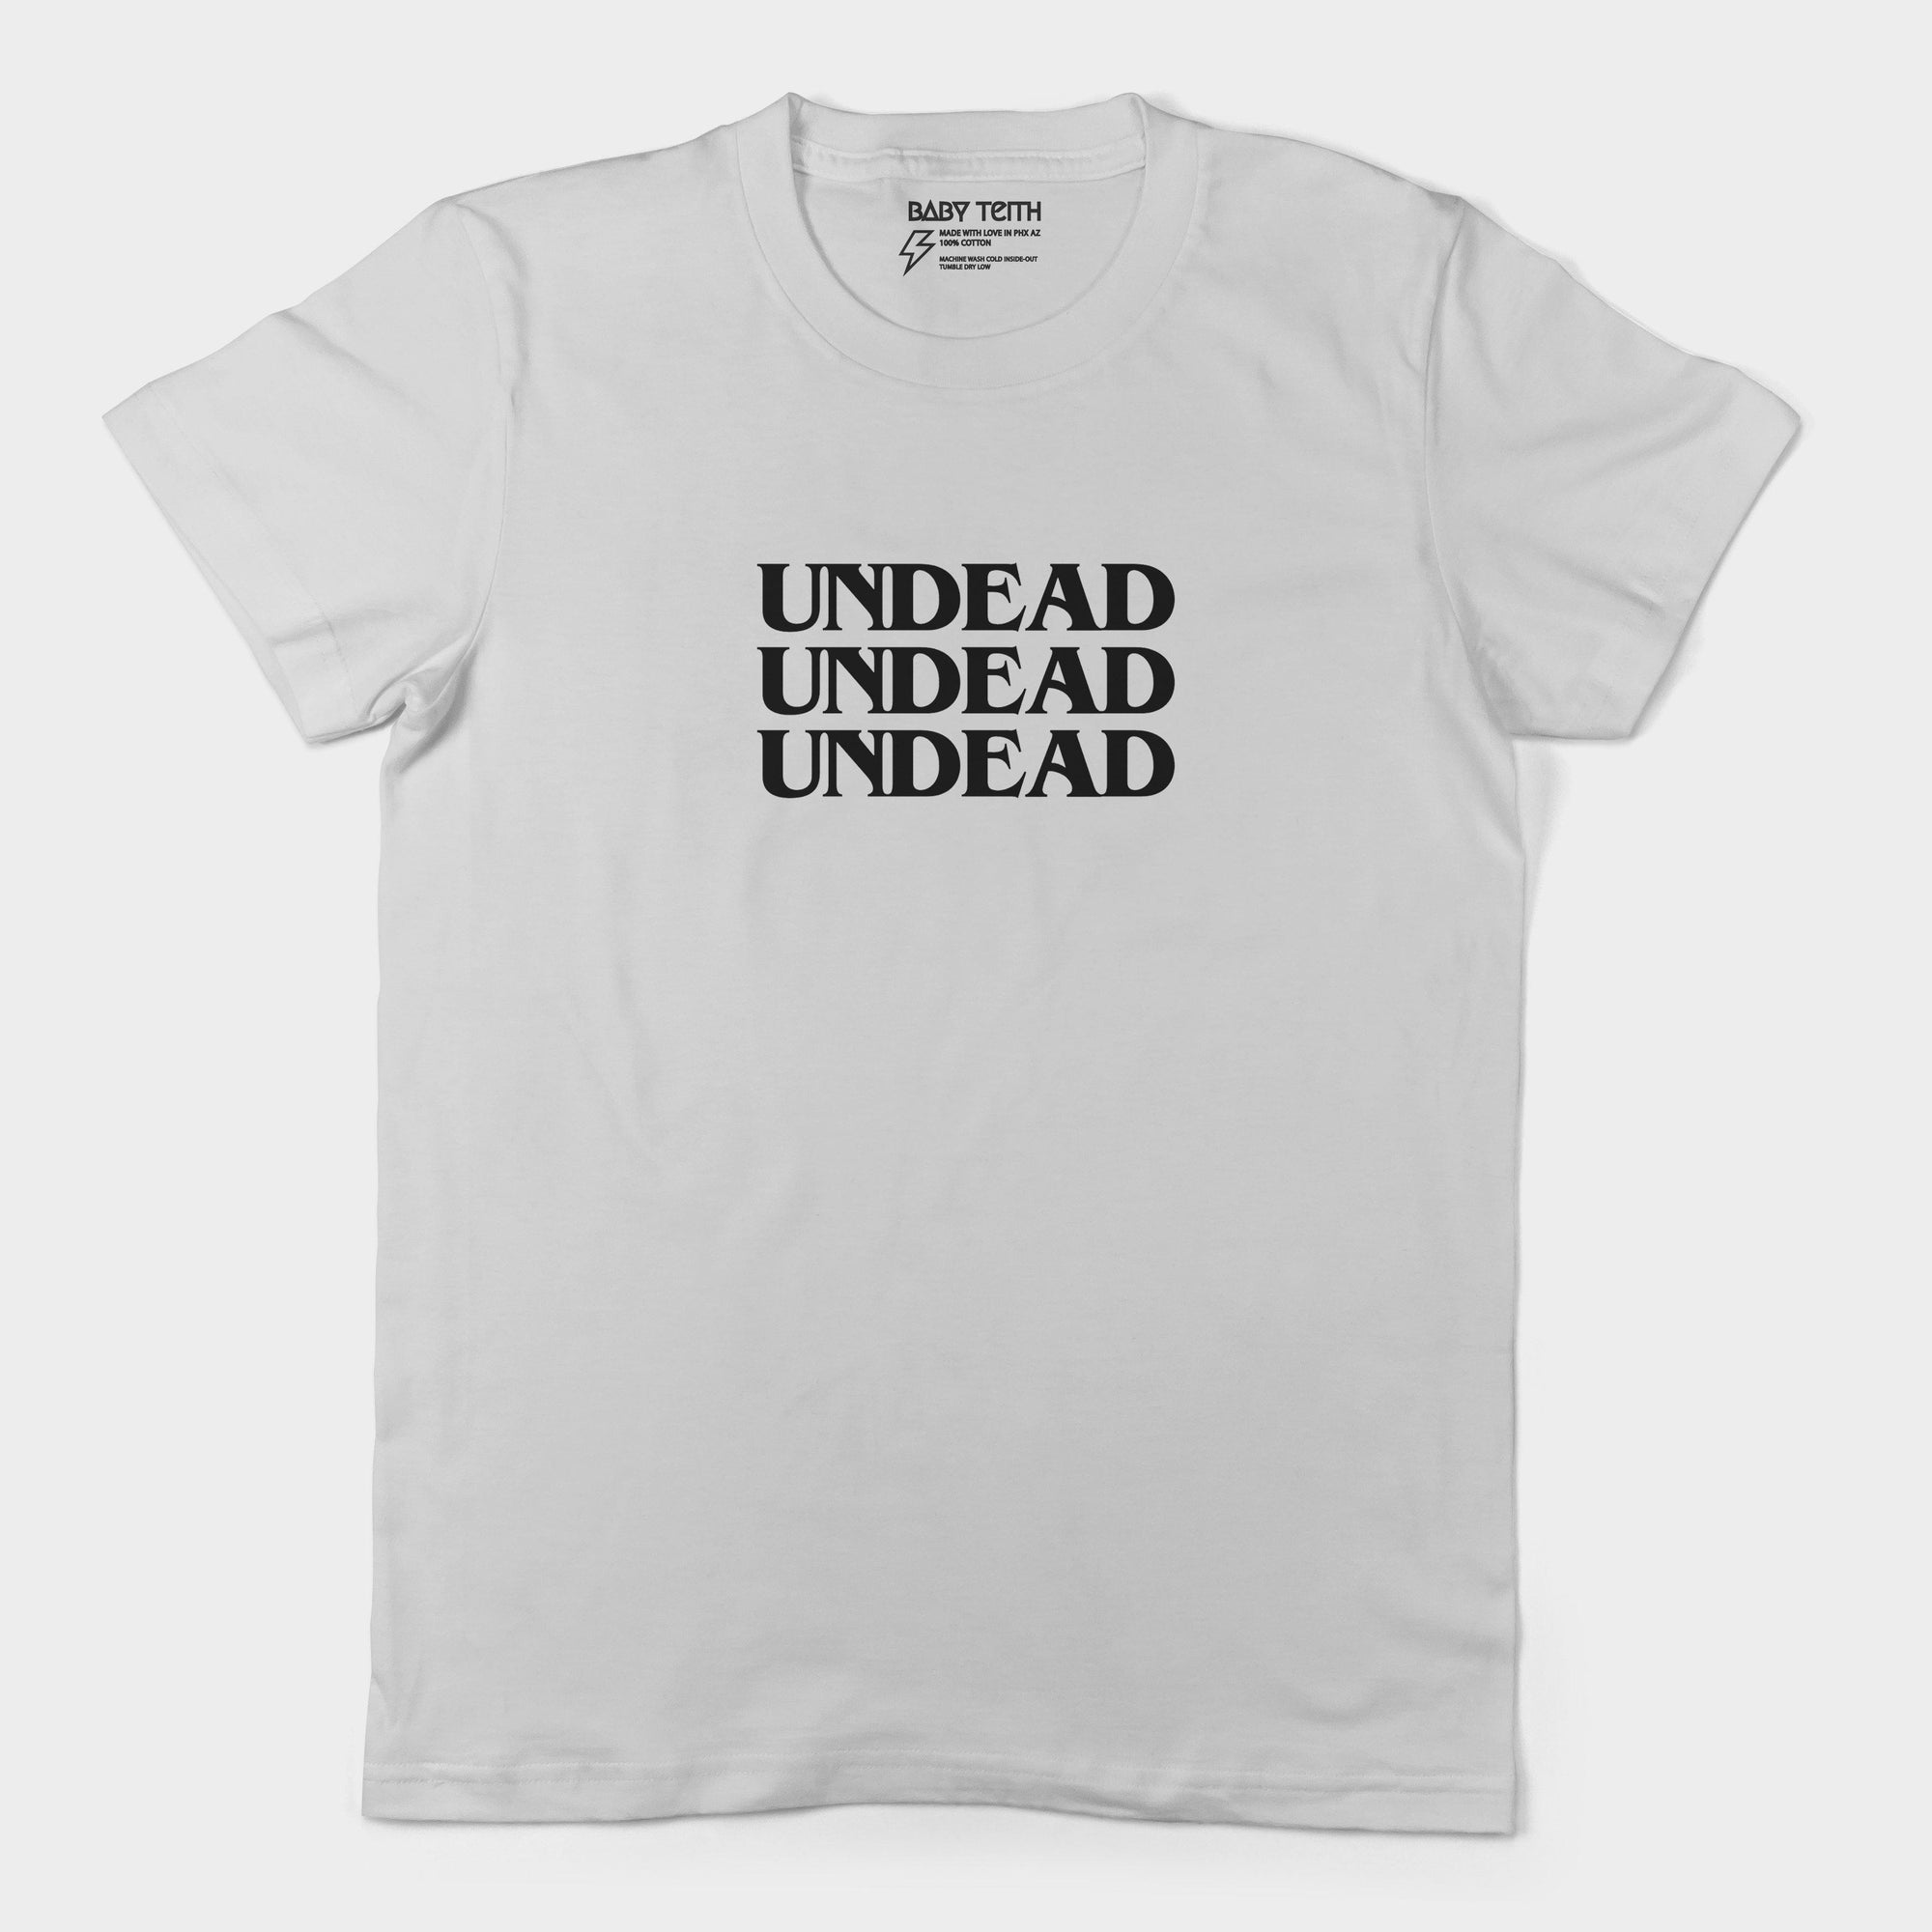 Undead Unisex Tee for Adults (4 Colors) - Baby Teith